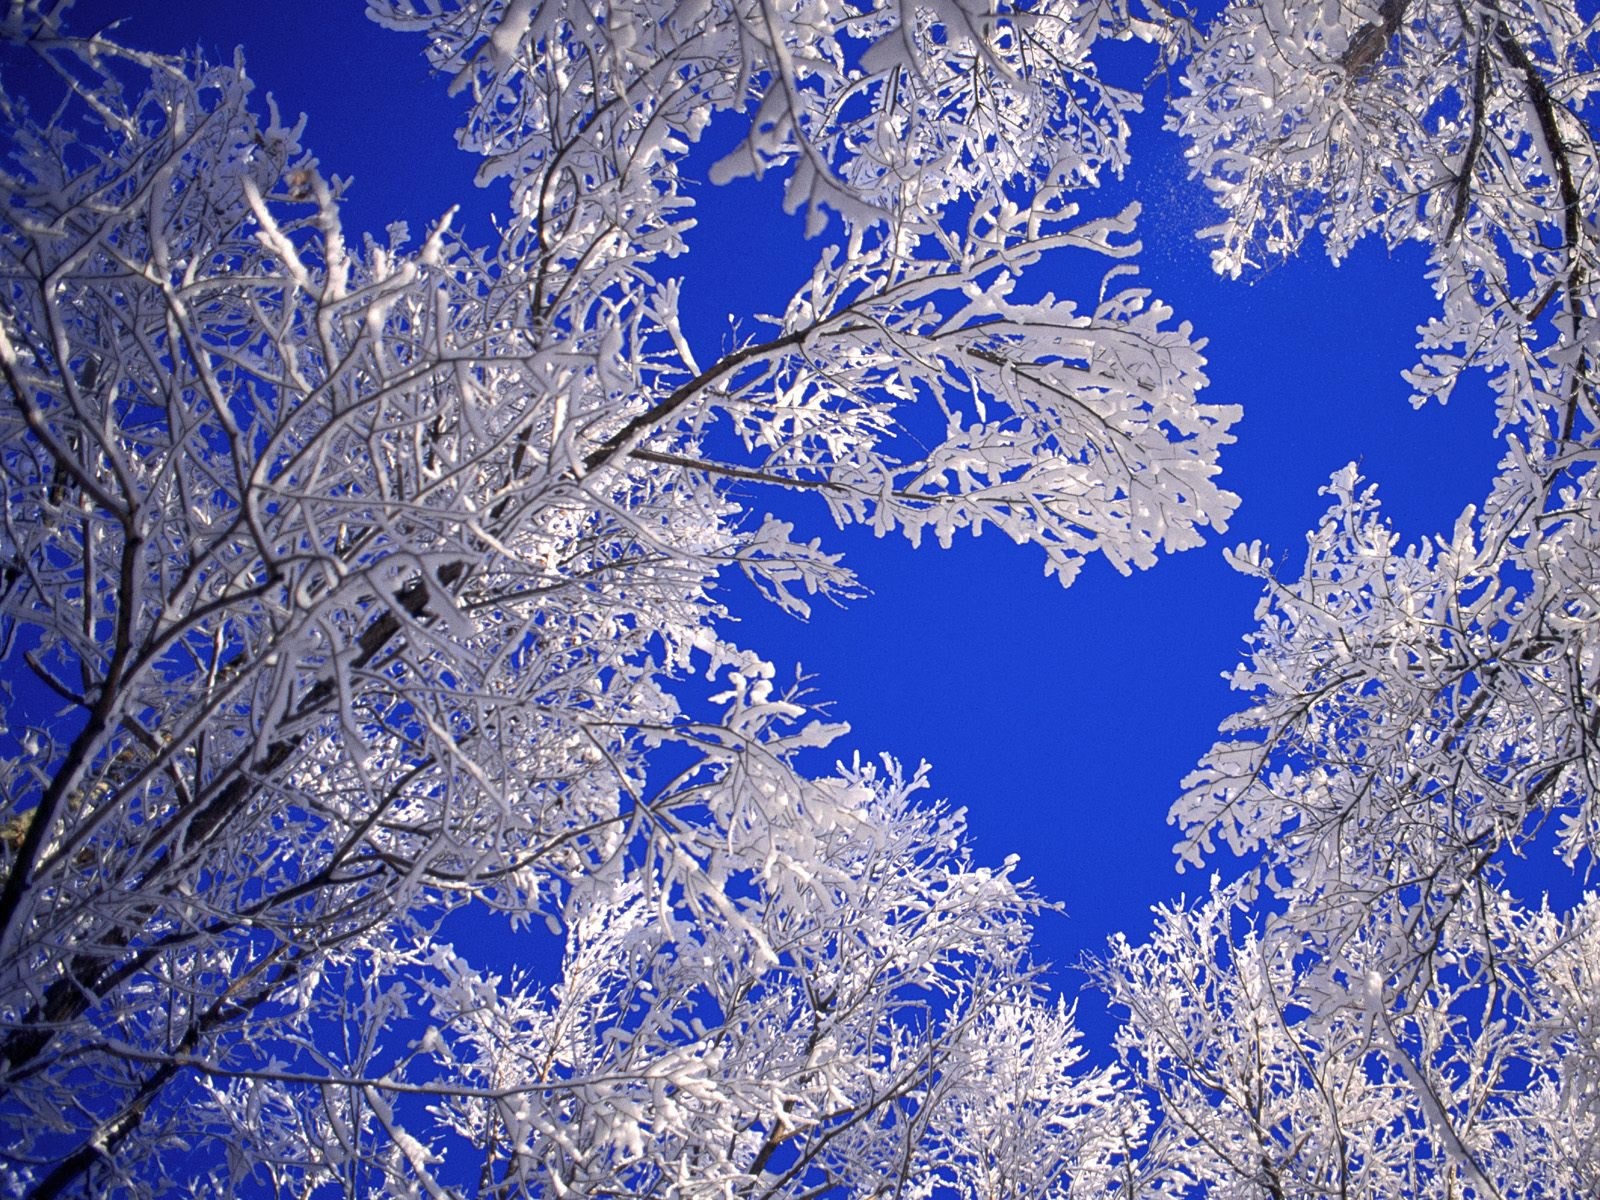 Frosted Trees Boulder Colorado   Scenic Wallpaper Image featuring Snow